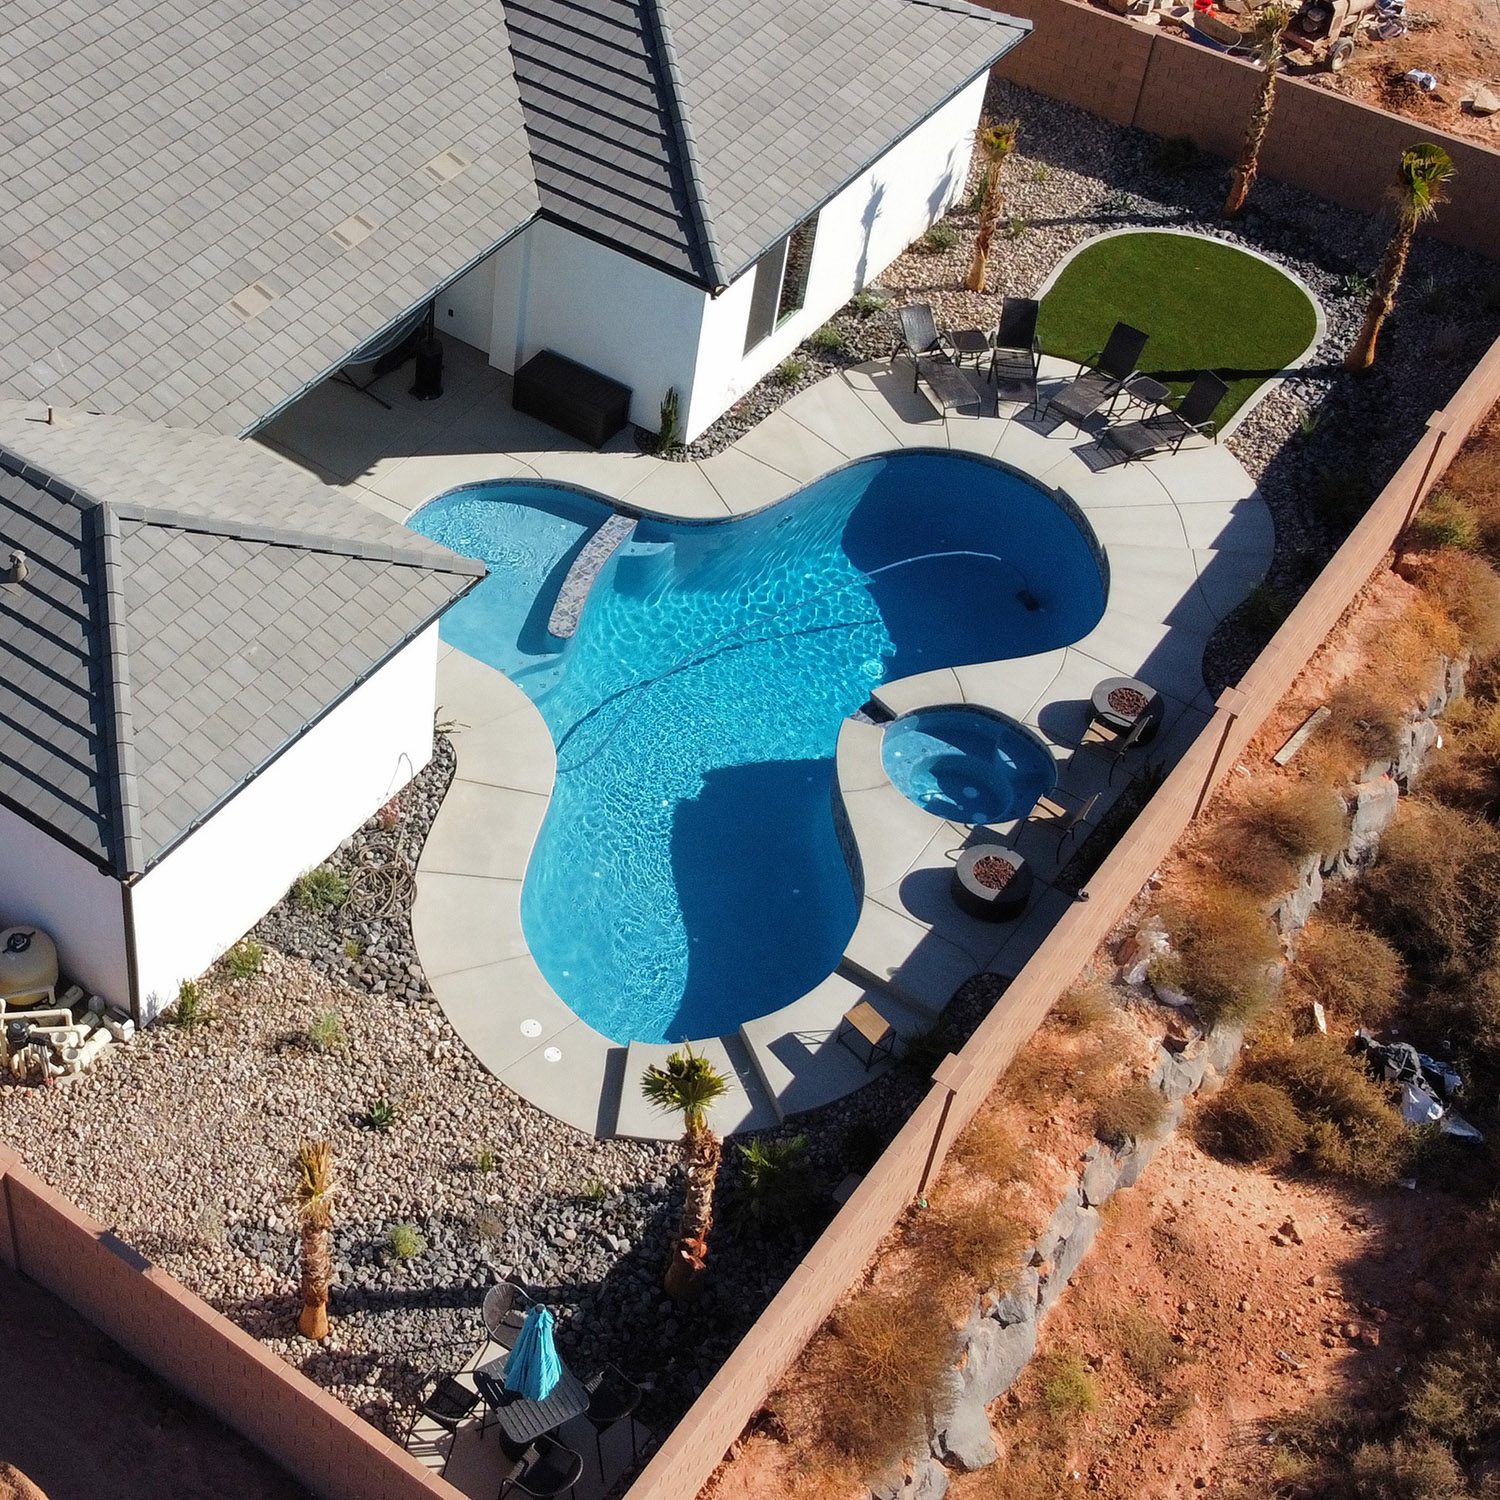 Clover shaped pool and backyard landscaping in the Little Valley area of St. George, Utah.